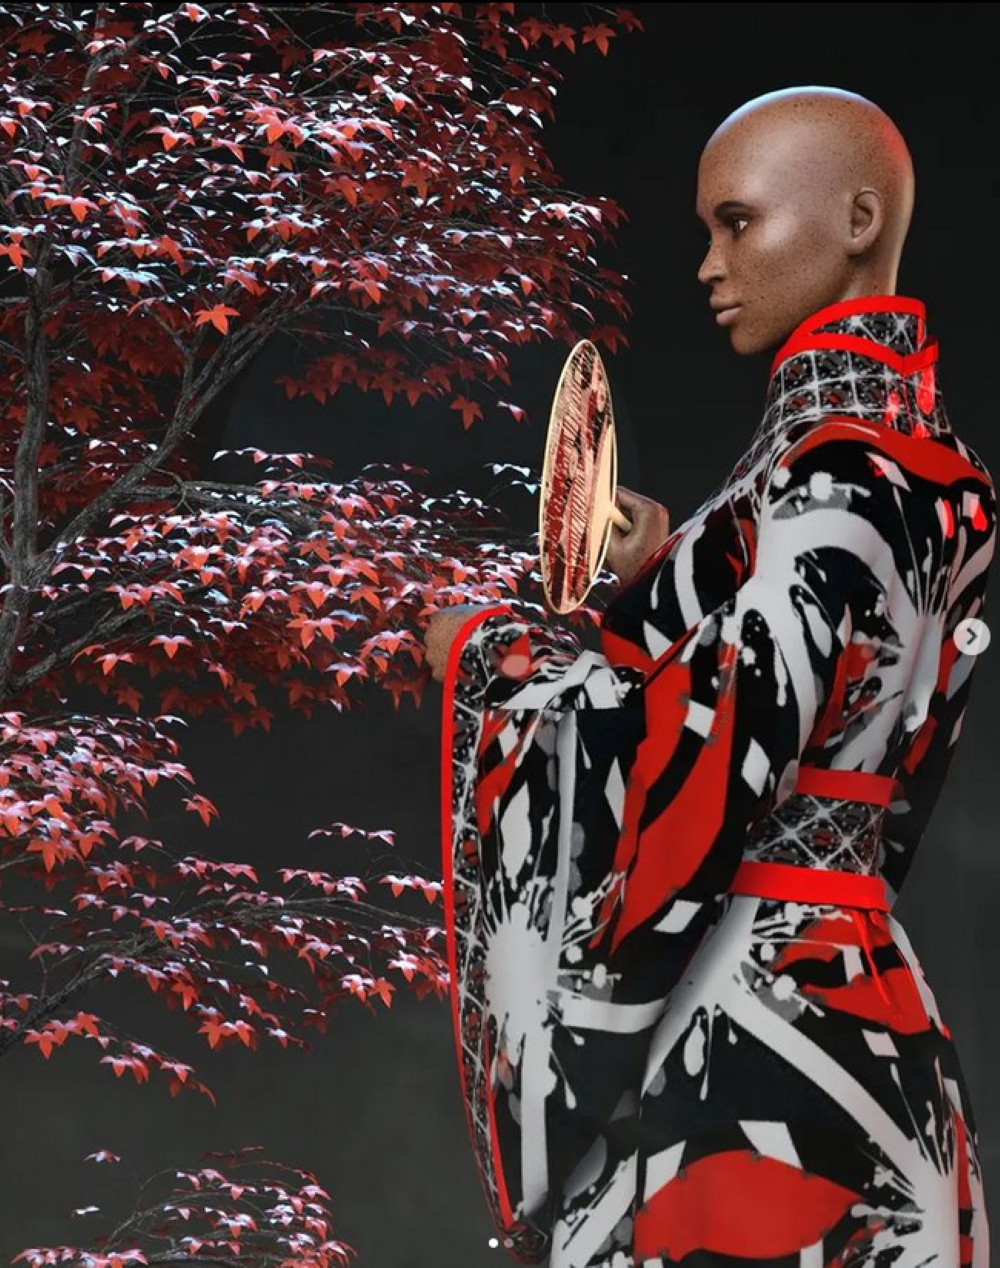 Combining one of many African Elements (Cowry) into a print and used it in the creation of Hanfu, one of traditional Chinese costumes.